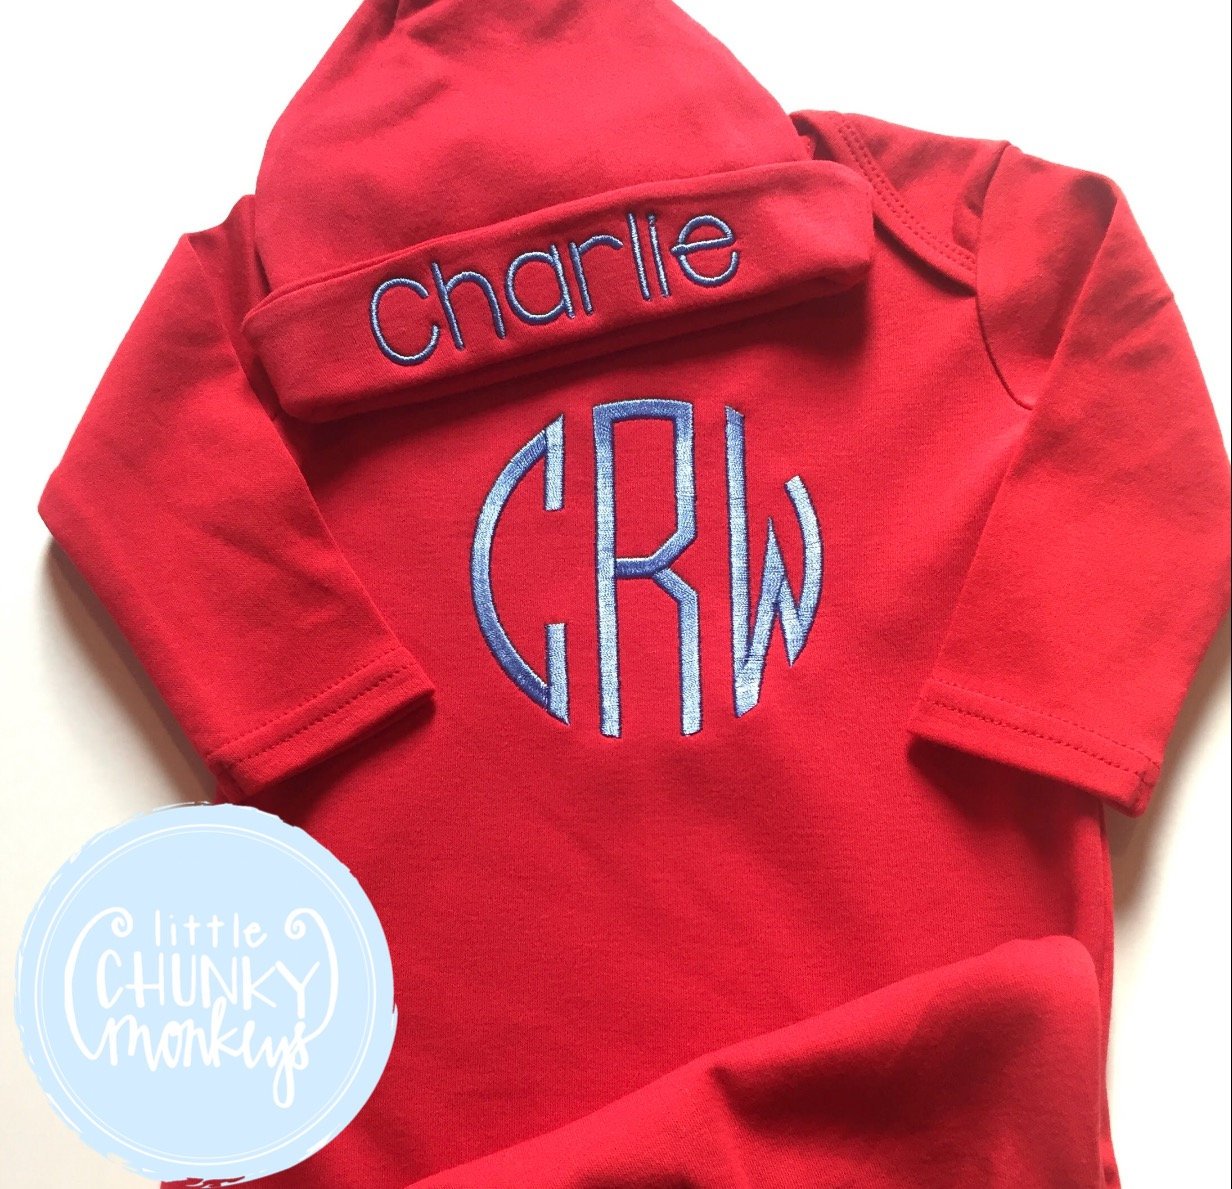 Baby Boy Gown - Bring Home Shirt - Personalized Newborn Name Gown + Cap in Red